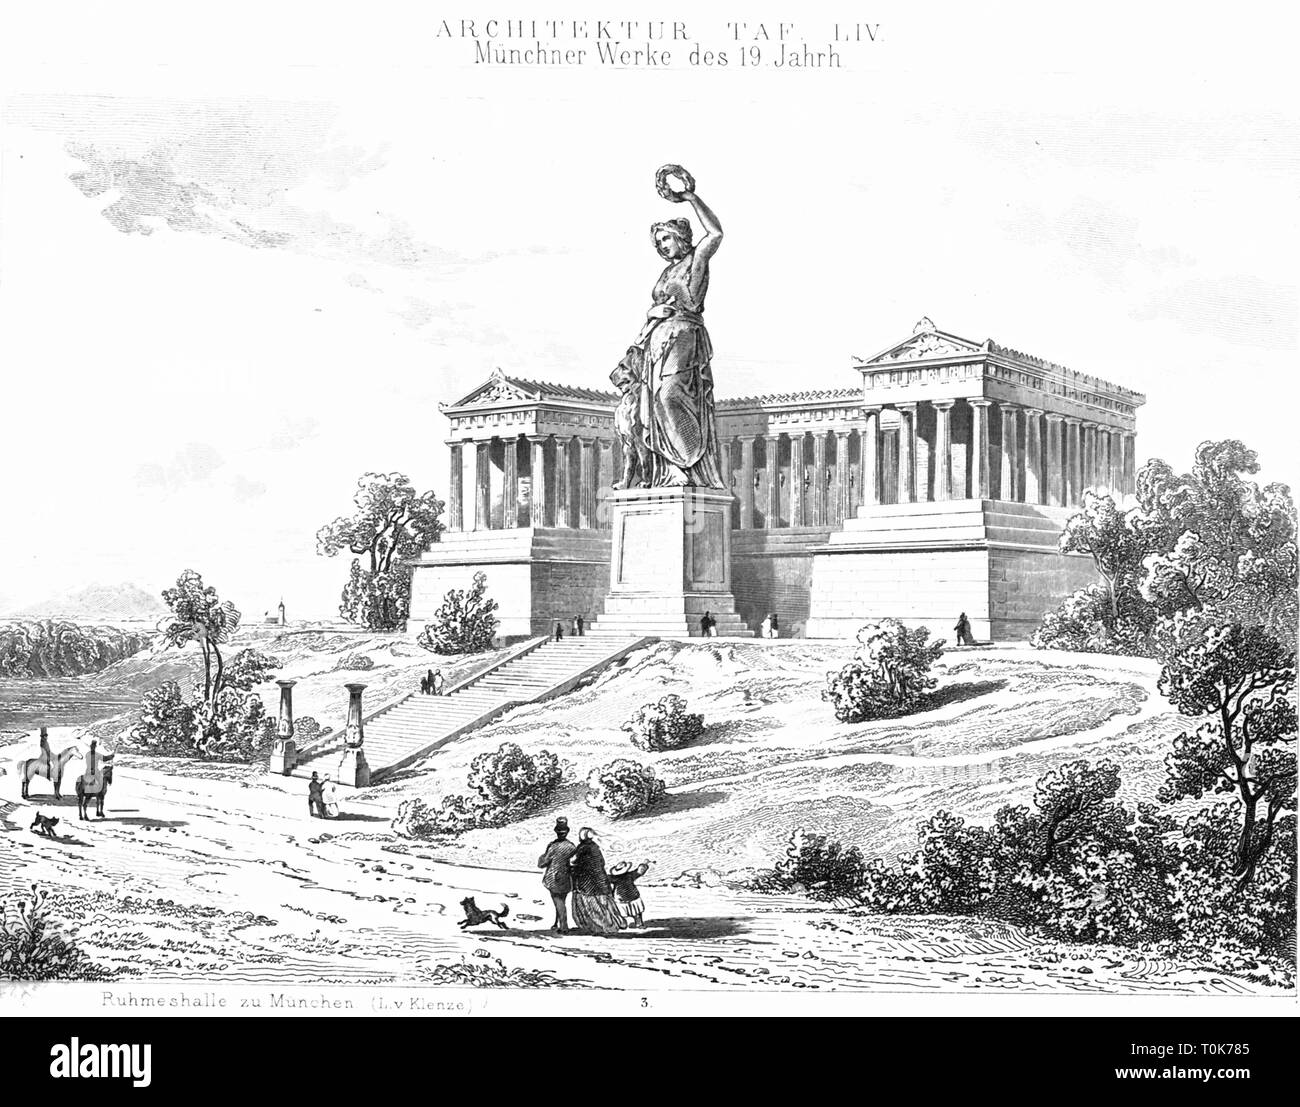 geography / travel, Germany, Bavaria, Munich, buildings, Ruhmeshalle (Hall of Fame), built 1843 - 1853, architect: Leo von Klenze, exterior view, illustration from 'Denkmaeler der Kunst' (Monuments of Art), by Wilhelm Luebke and Carl von Luetzow, 3rd edition, Stuttgart 1879, volume 2, steel engraving by Riegel, chapter on architecture, plate LIV, 19th century, columned hall, columned halls, Therese's Green, Doric, classicism, classical, classic, historic, historical, Denkmaler, Denkmäler, Lubke, Lübke, Lutzow, Lützow, Additional-Rights-Clearance-Info-Not-Available Stock Photo